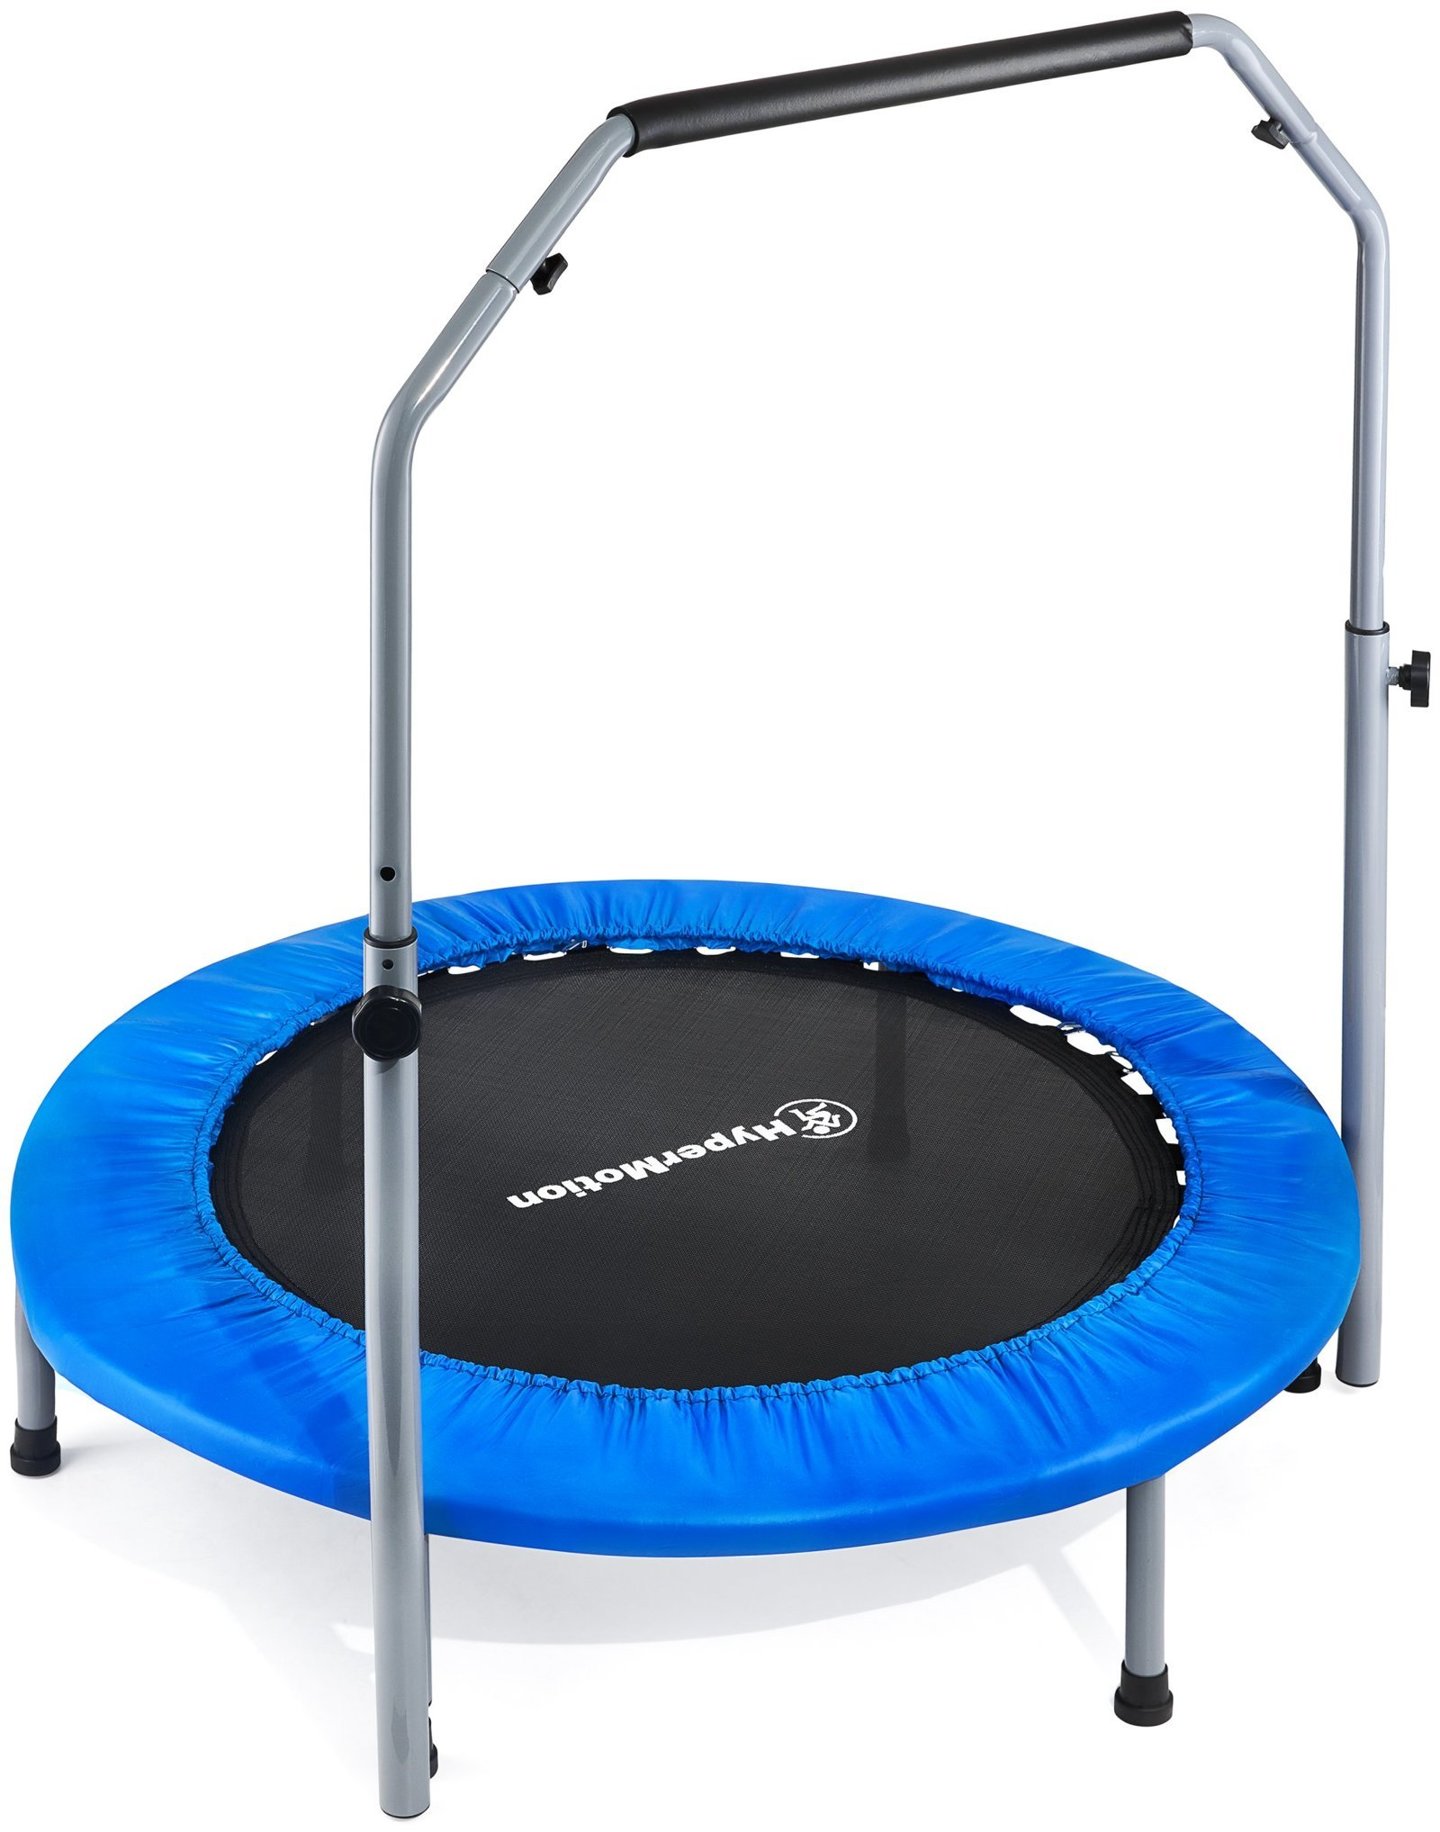 Trampoline with handle - 96 cm - for kids, teenagers and adults - for home and garden